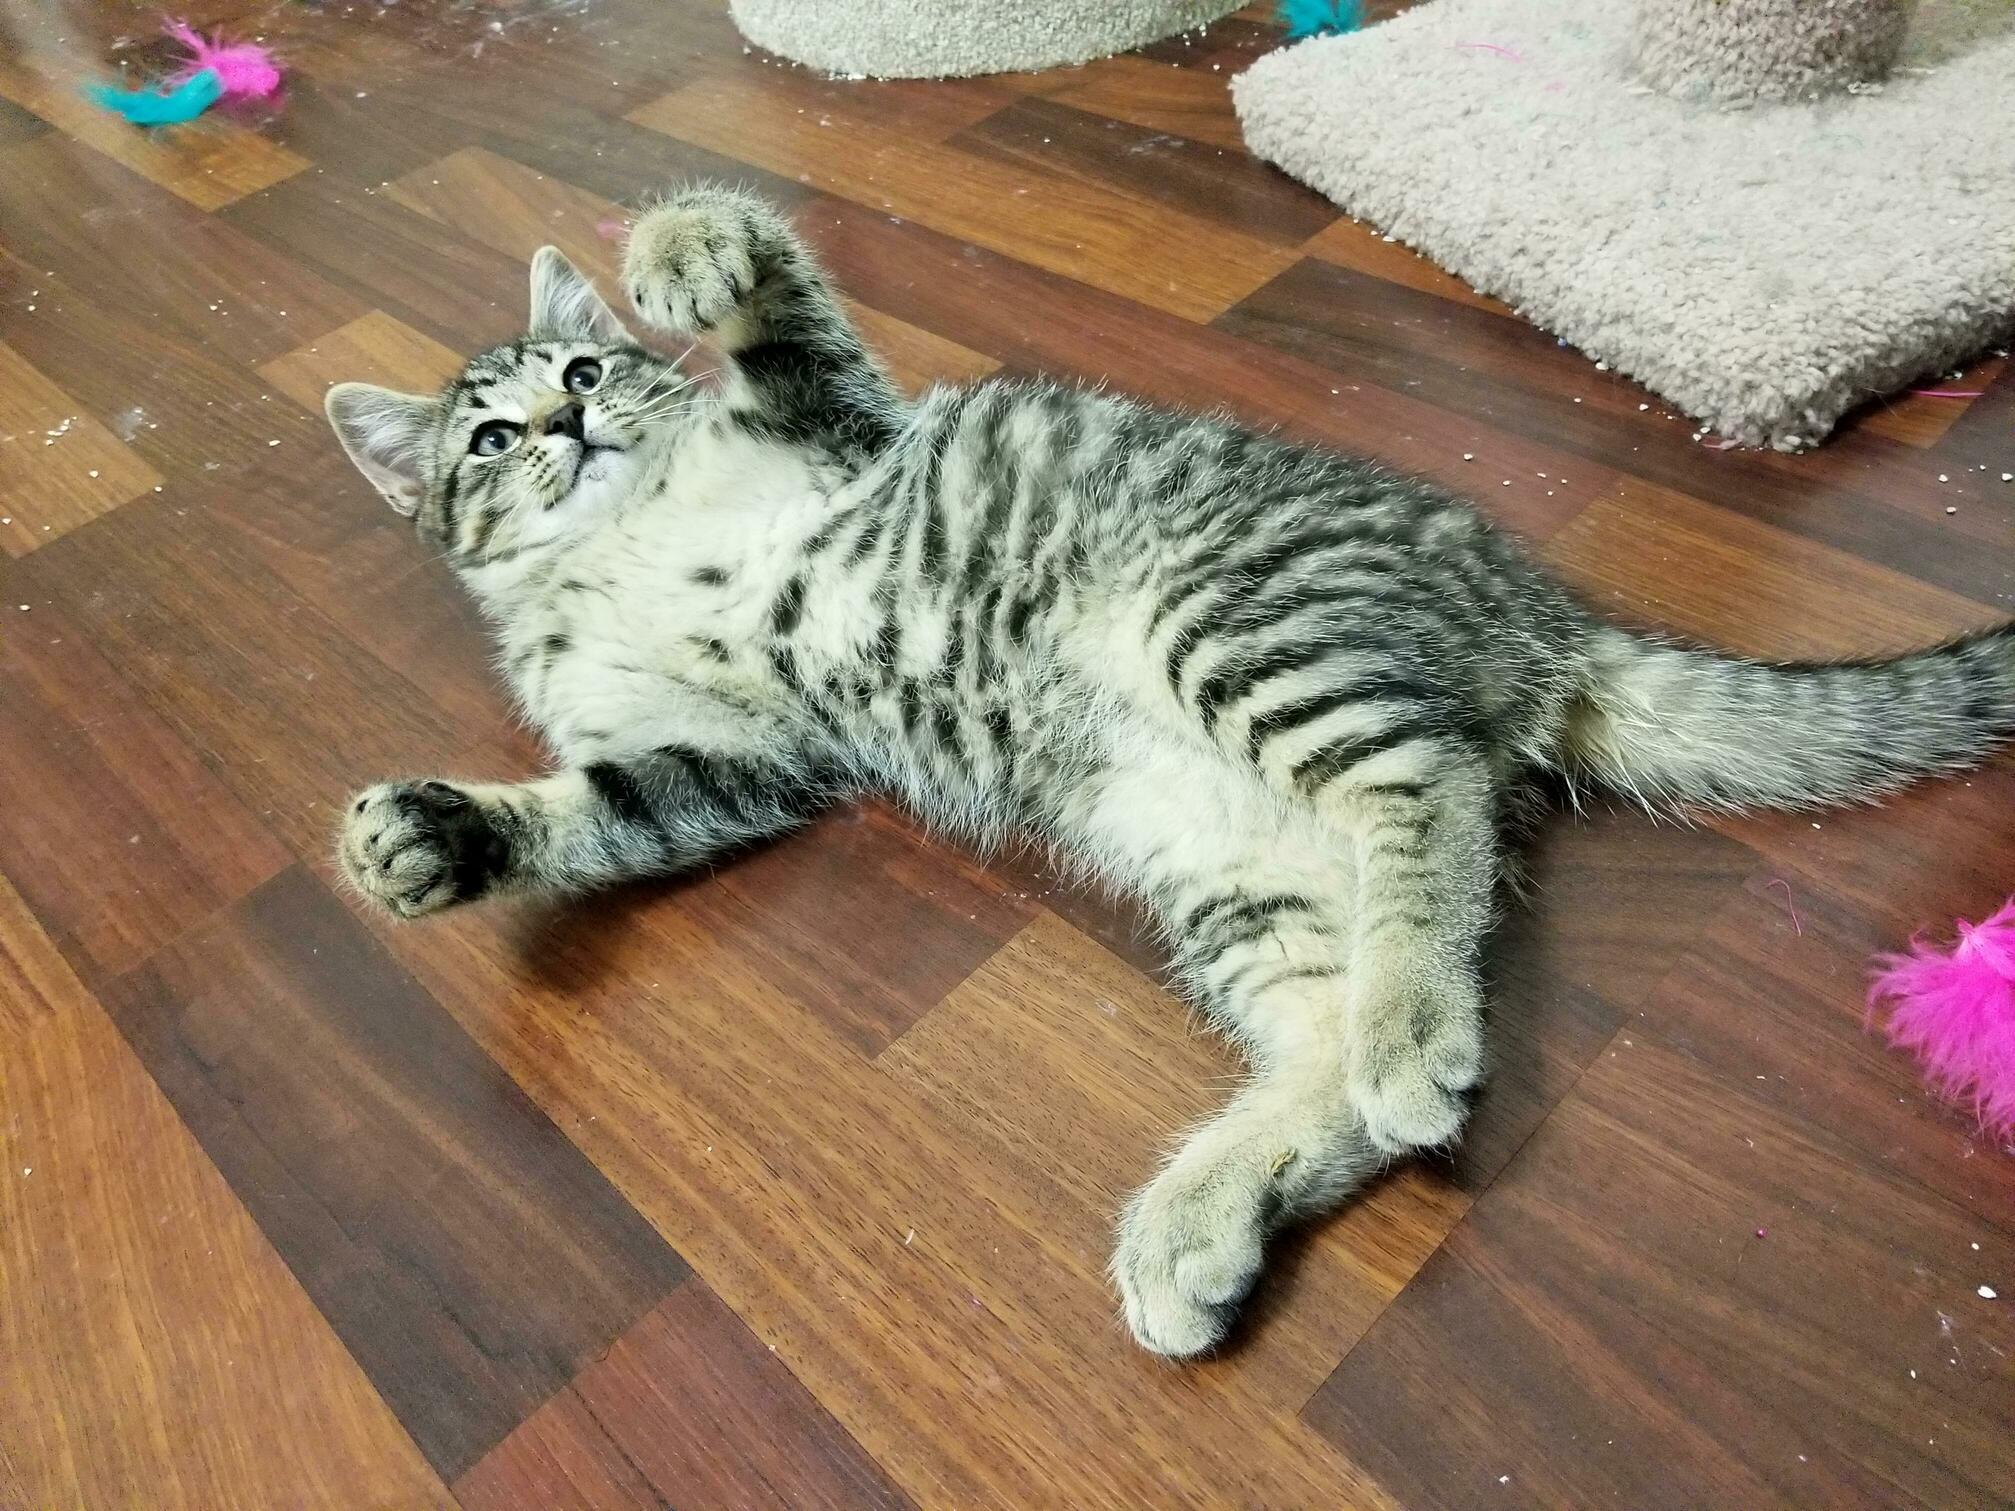 This little guy wiped his shitty ass all over the floor and on a blanket today, but look at that kissable belly!